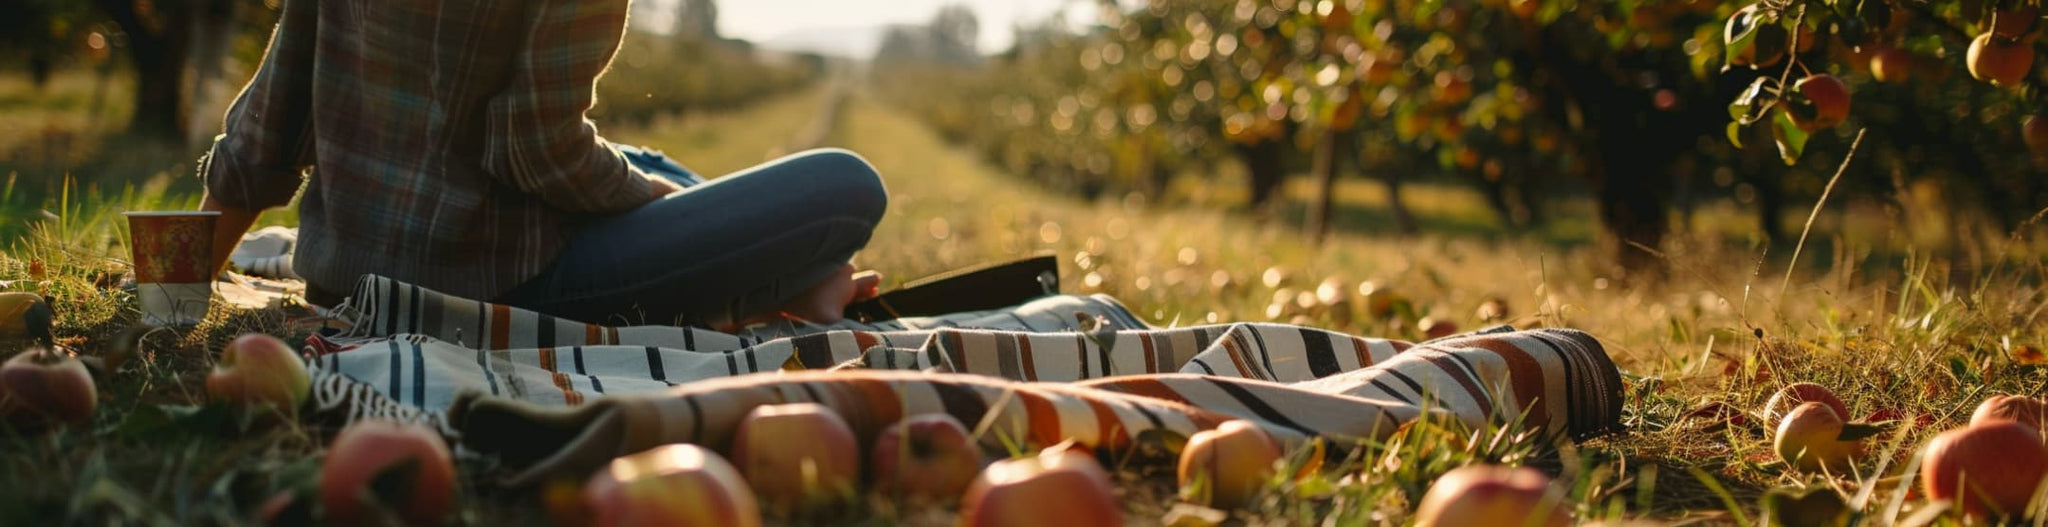 A person on a picnic blanket in an apple orchard, penning their thoughts on abundance and gratitude